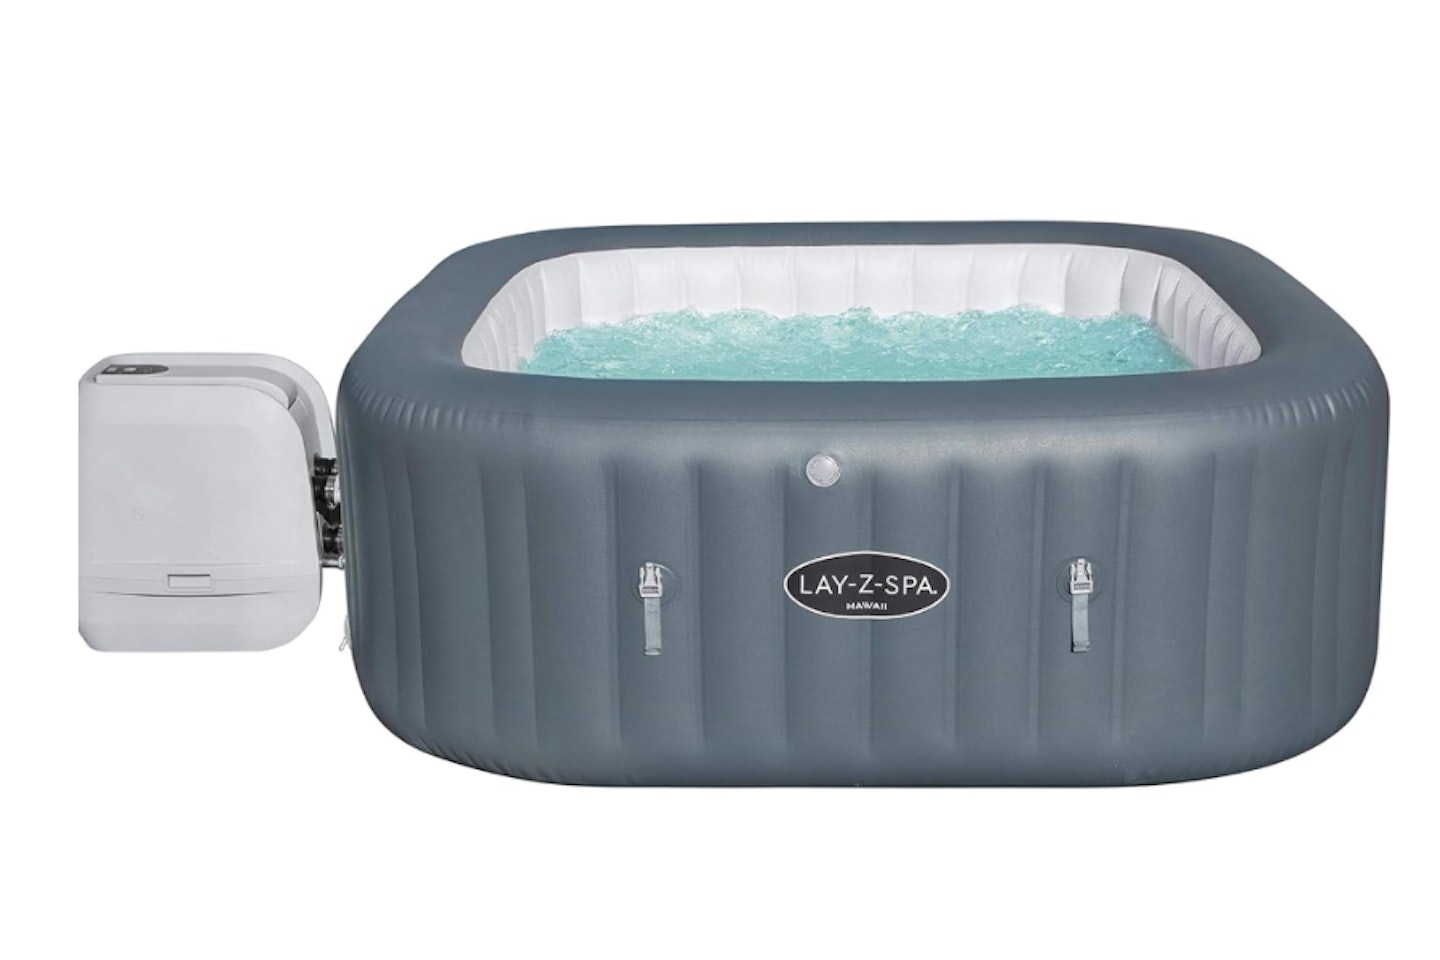 Lay-Z-Spa Hawaii Hot Tub, 8 HydroJet Pro Massage System Inflatable Spa